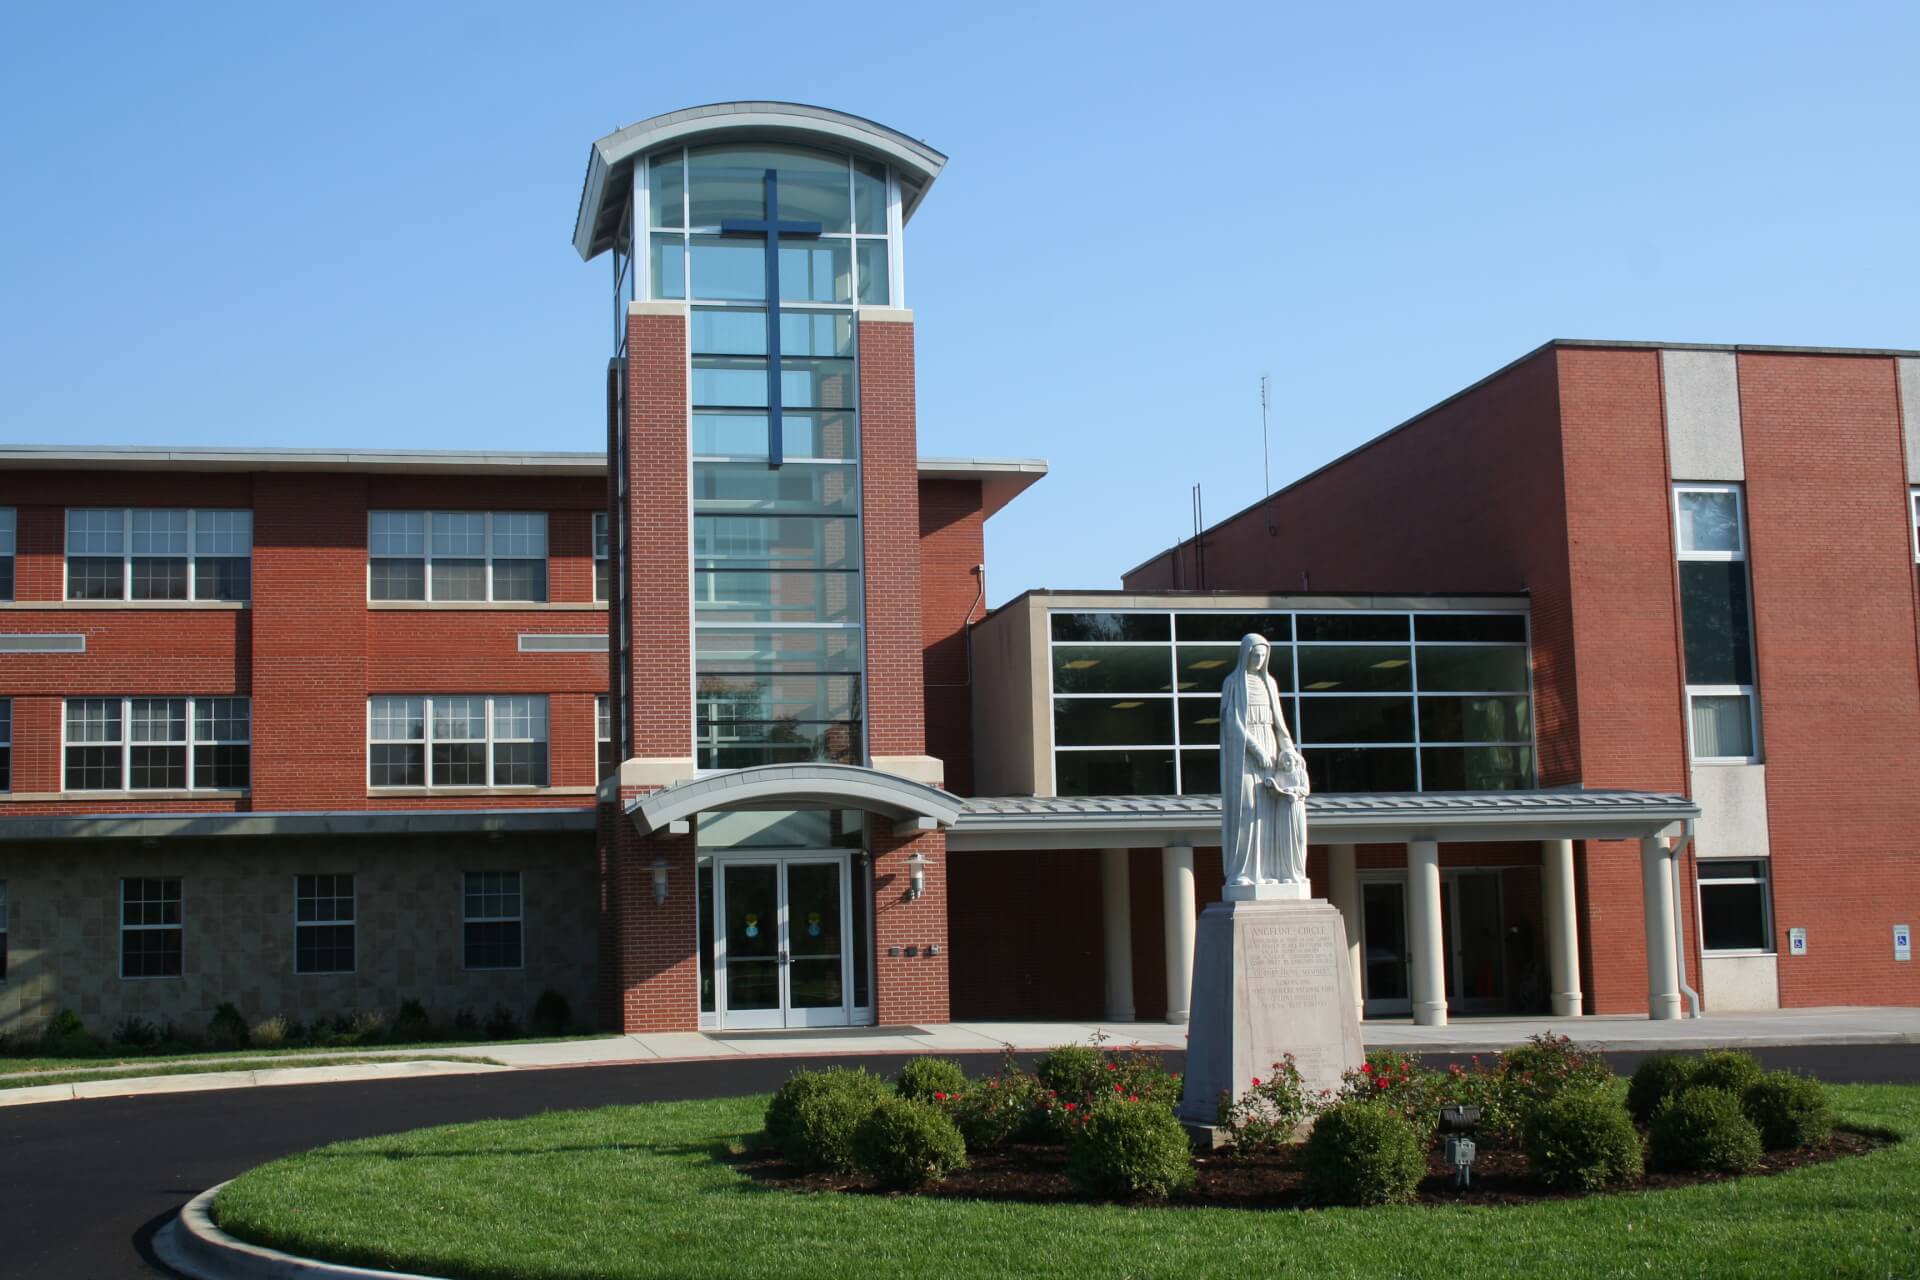 sacredheartacademy-catholic-schools-in-the-archdiocese-of-louisville